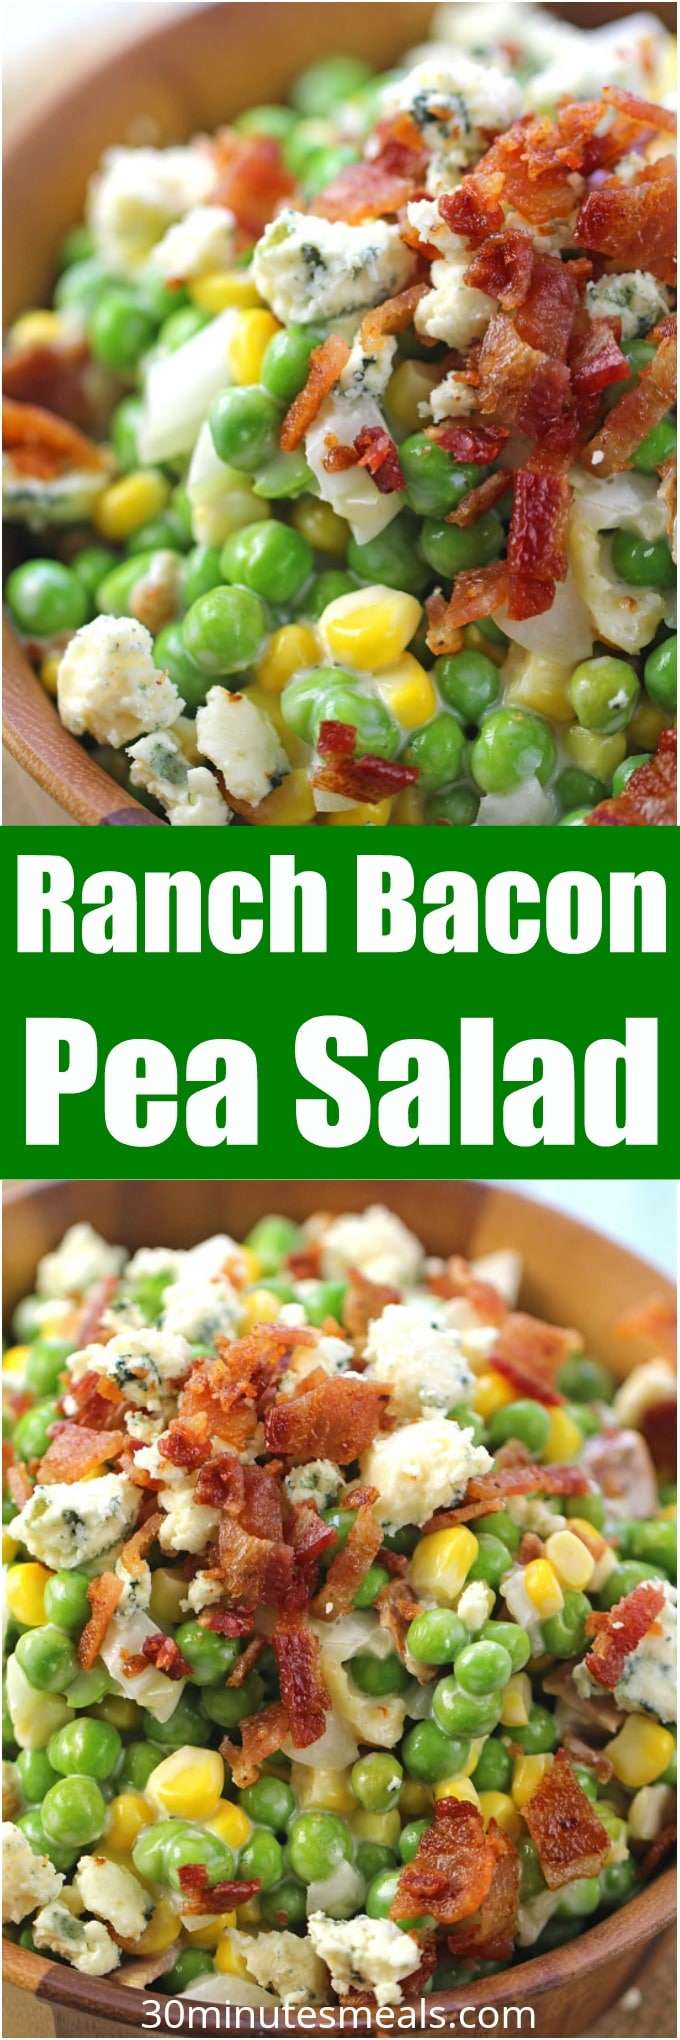 Creamy Ranch Bacon Pea Salad with sweet corn, is the perfect summery side dish. Made with creamy ranch, lots of blue cheese and delicious, crispy bacon.